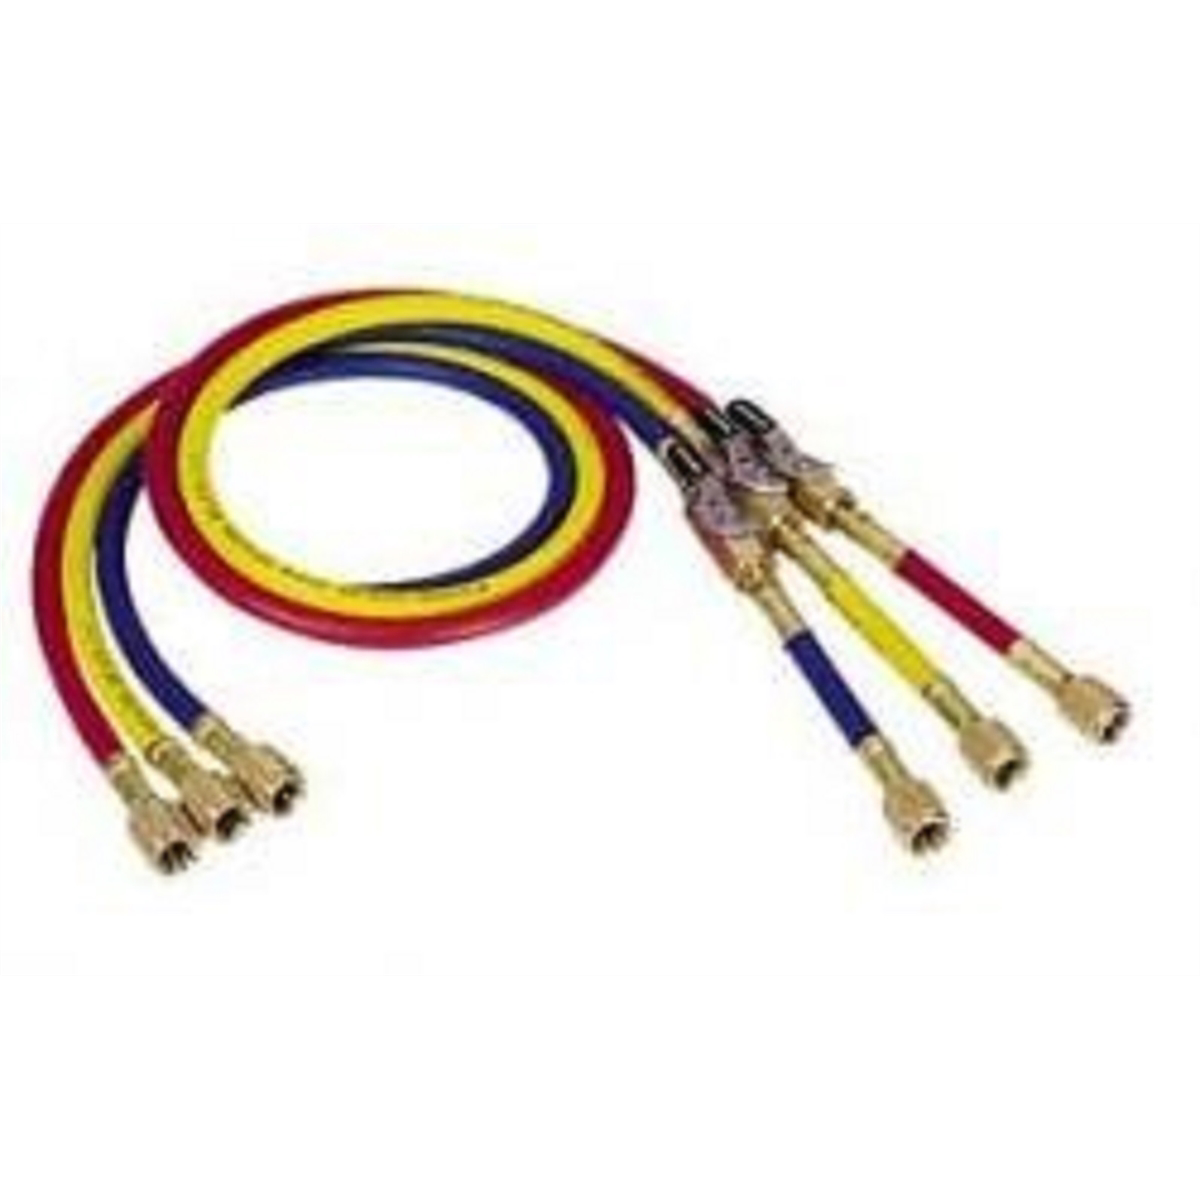 72" Yellow Standard Pressure Hose with Automatic Shut Off Valve